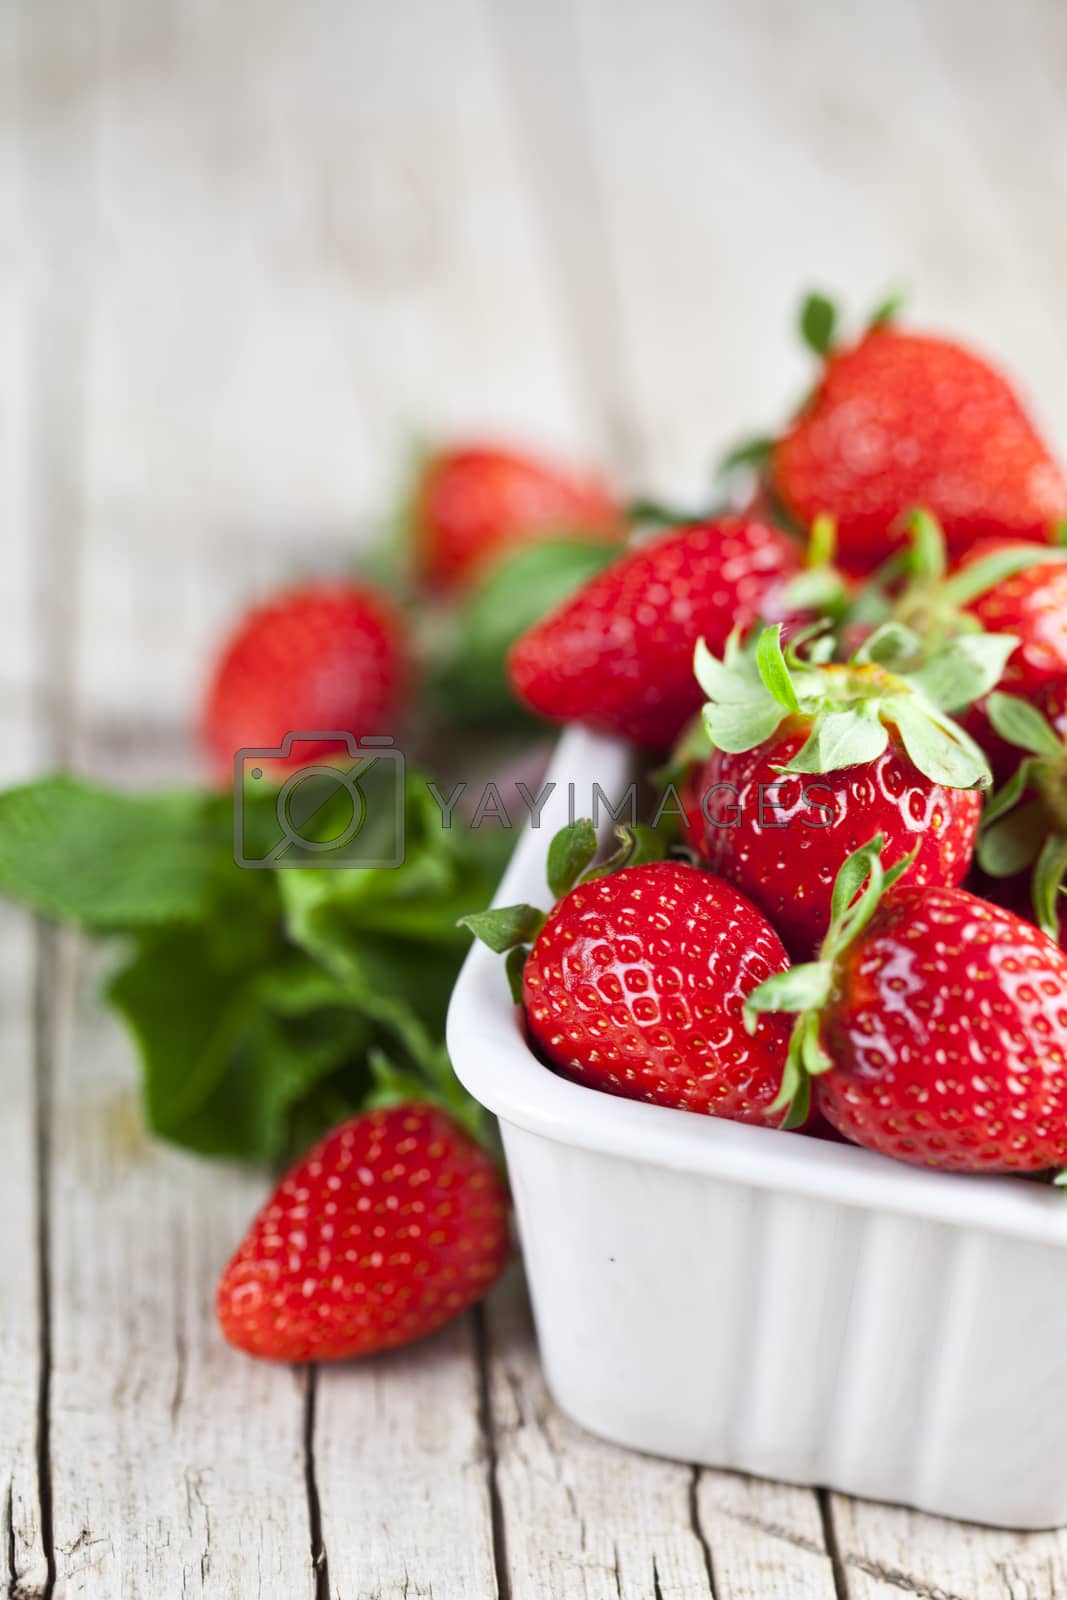 Royalty free image of Fresh red strawberries in white bowl and mint leaves on rustic w by marylooo